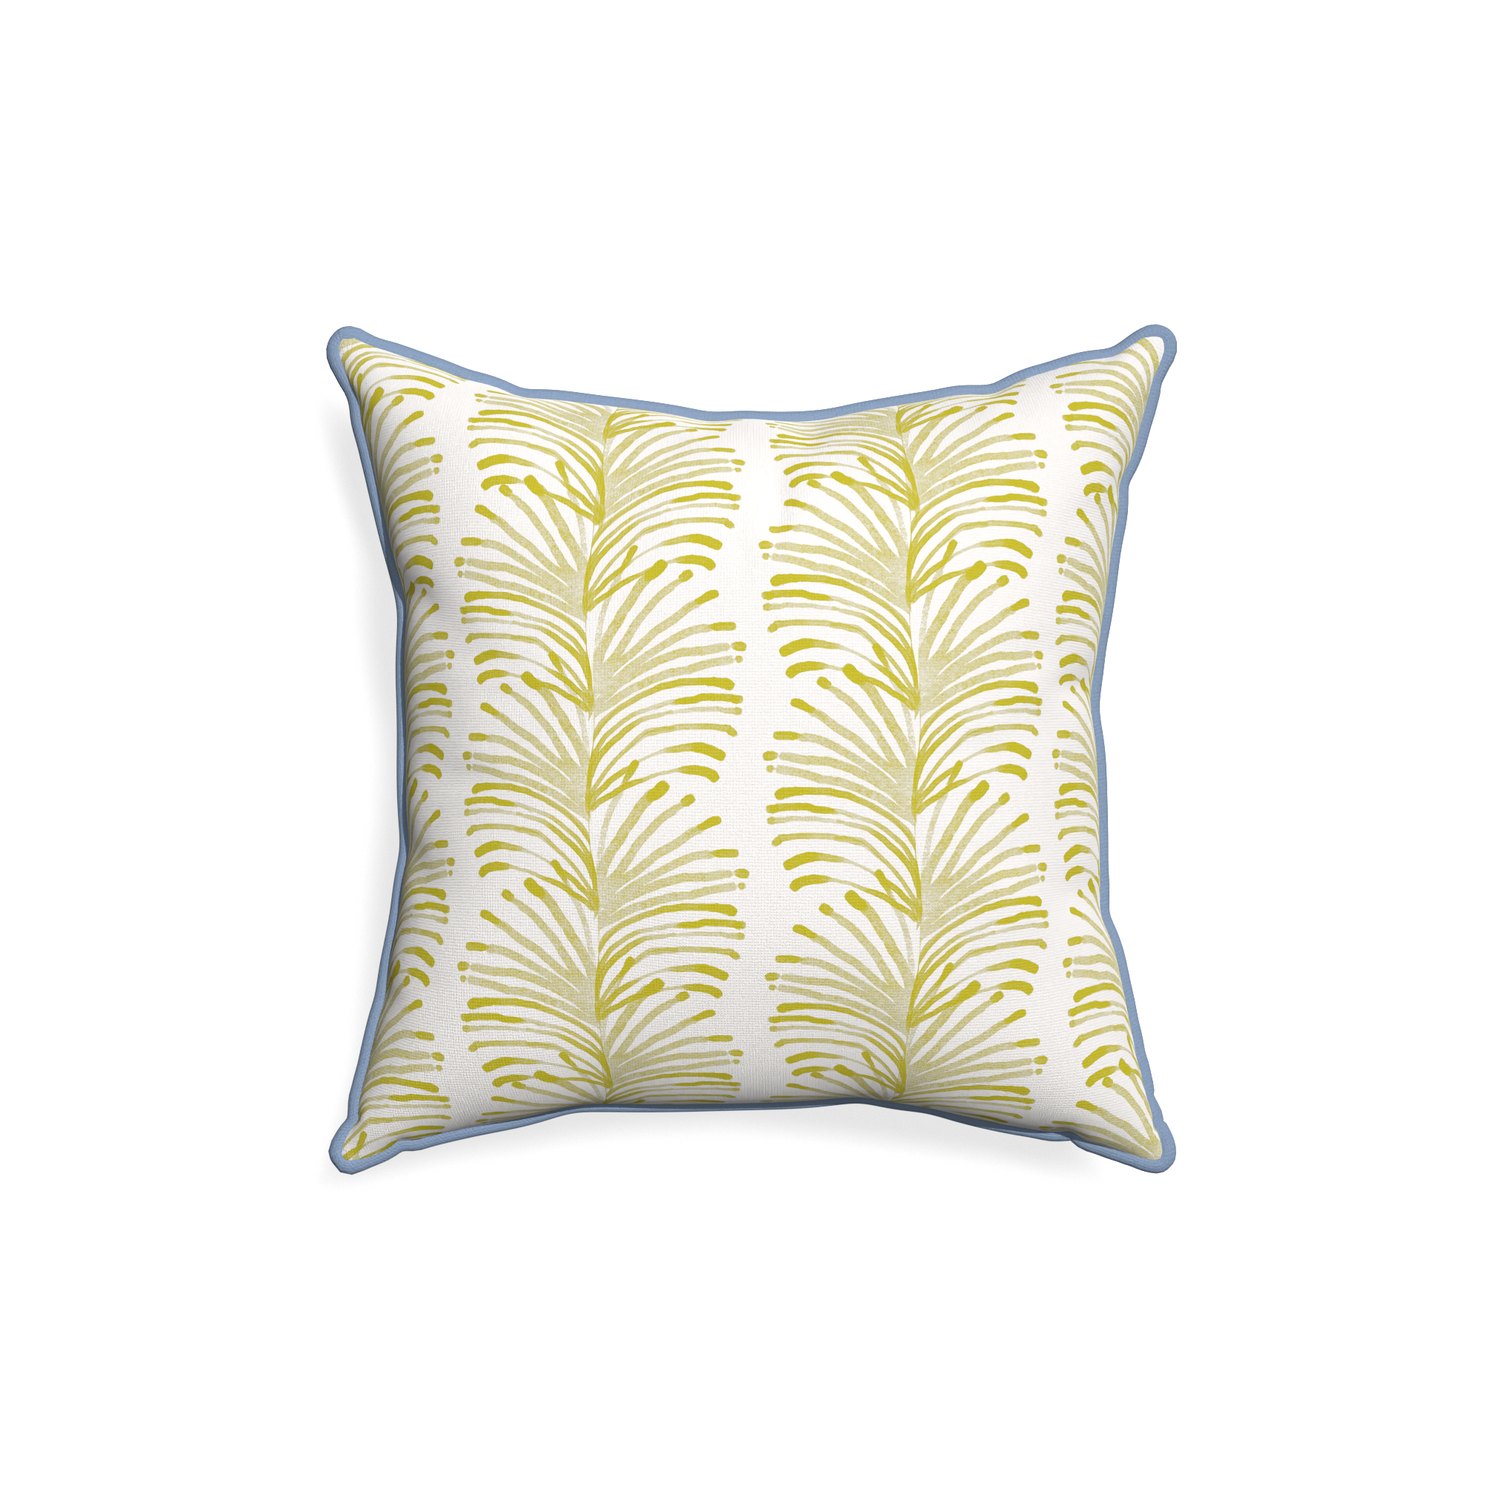 18-square emma chartreuse custom pillow with sky piping on white background